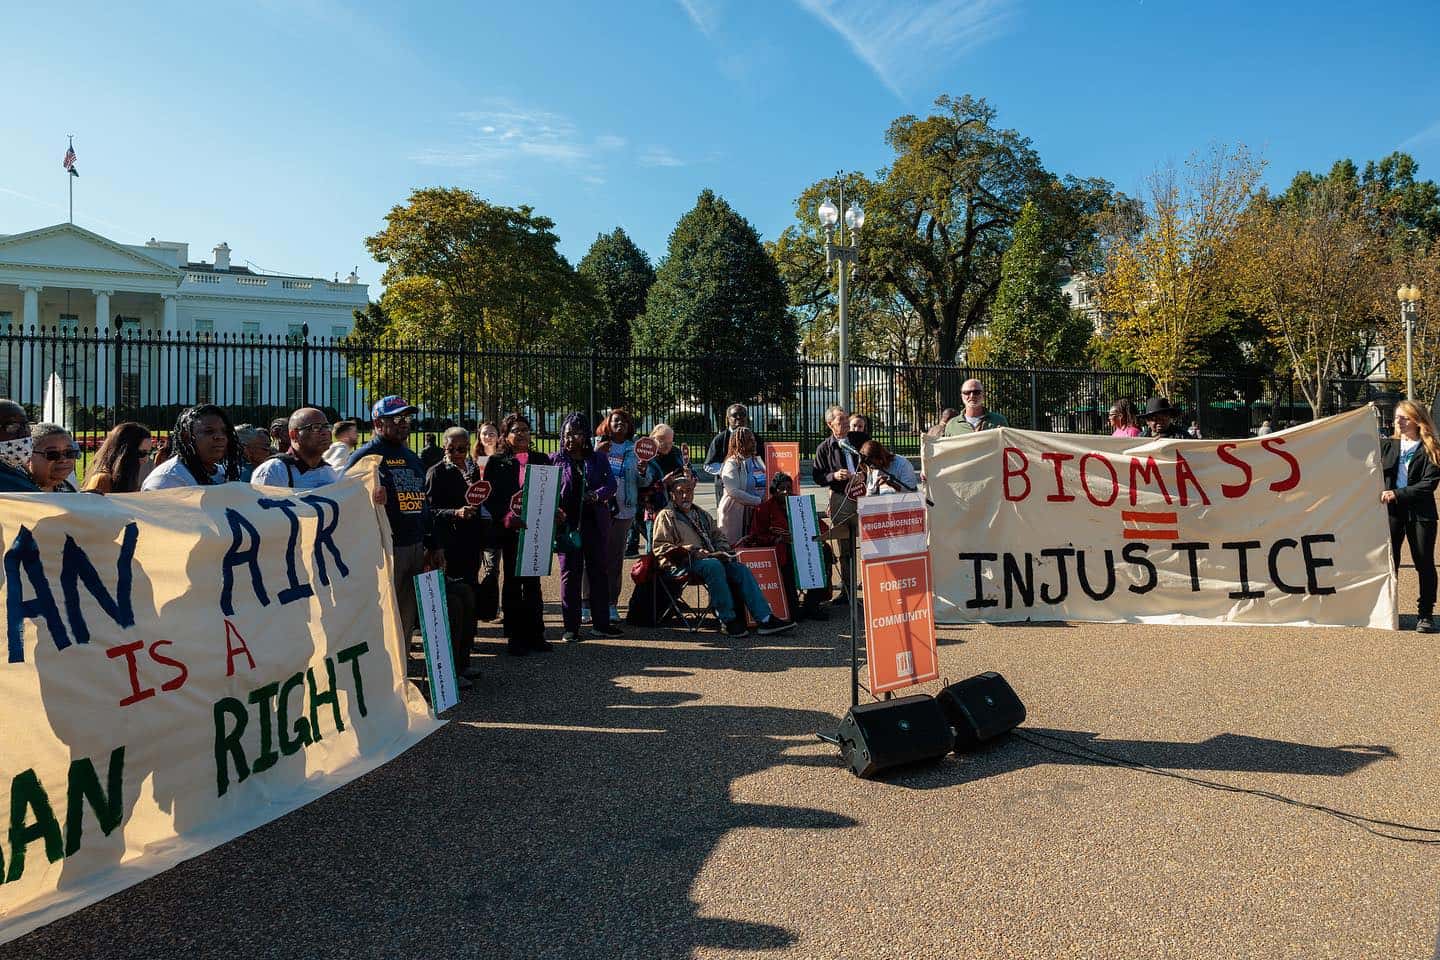 A group of protesters gathered outside of the White House, holding signs that read "Biomass is Injustice" and "Clean Air is a Human Right."